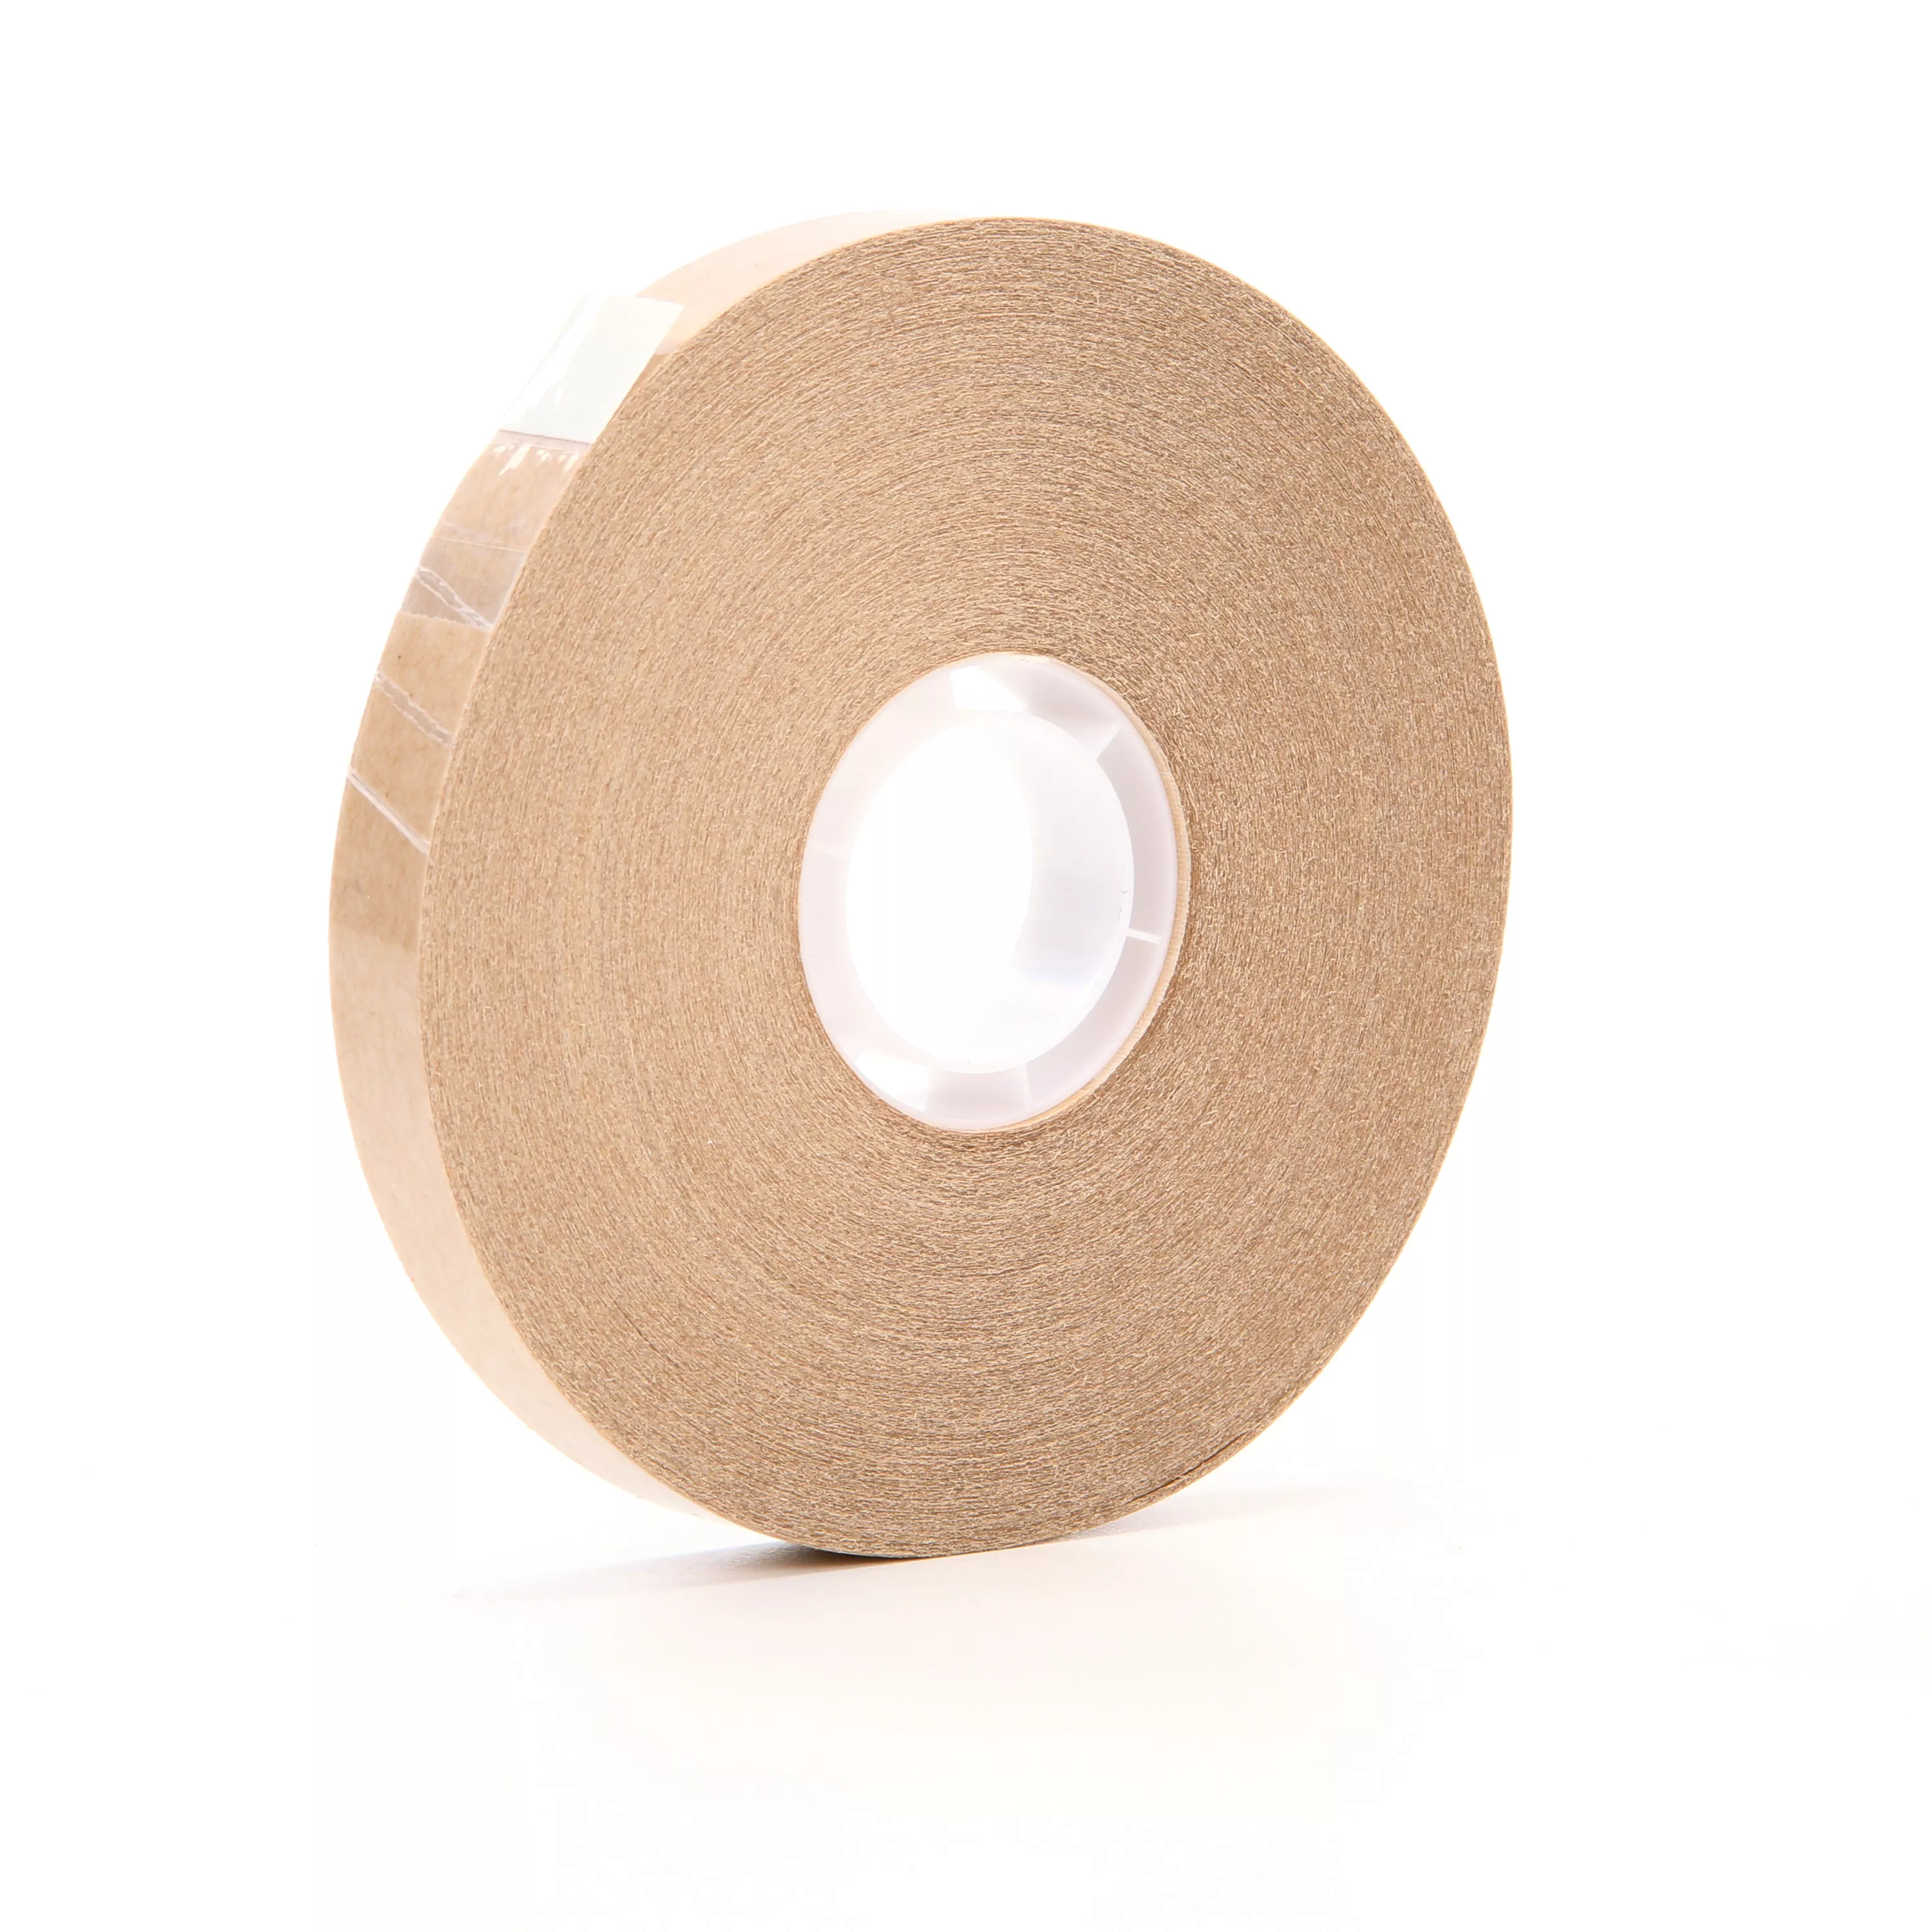 3M™ ATG Adhesive Transfer Tape 987, Clear, 1/2 in x 60 yd, 1.7 mil, (12
Roll/Carton) 72 Roll/Case